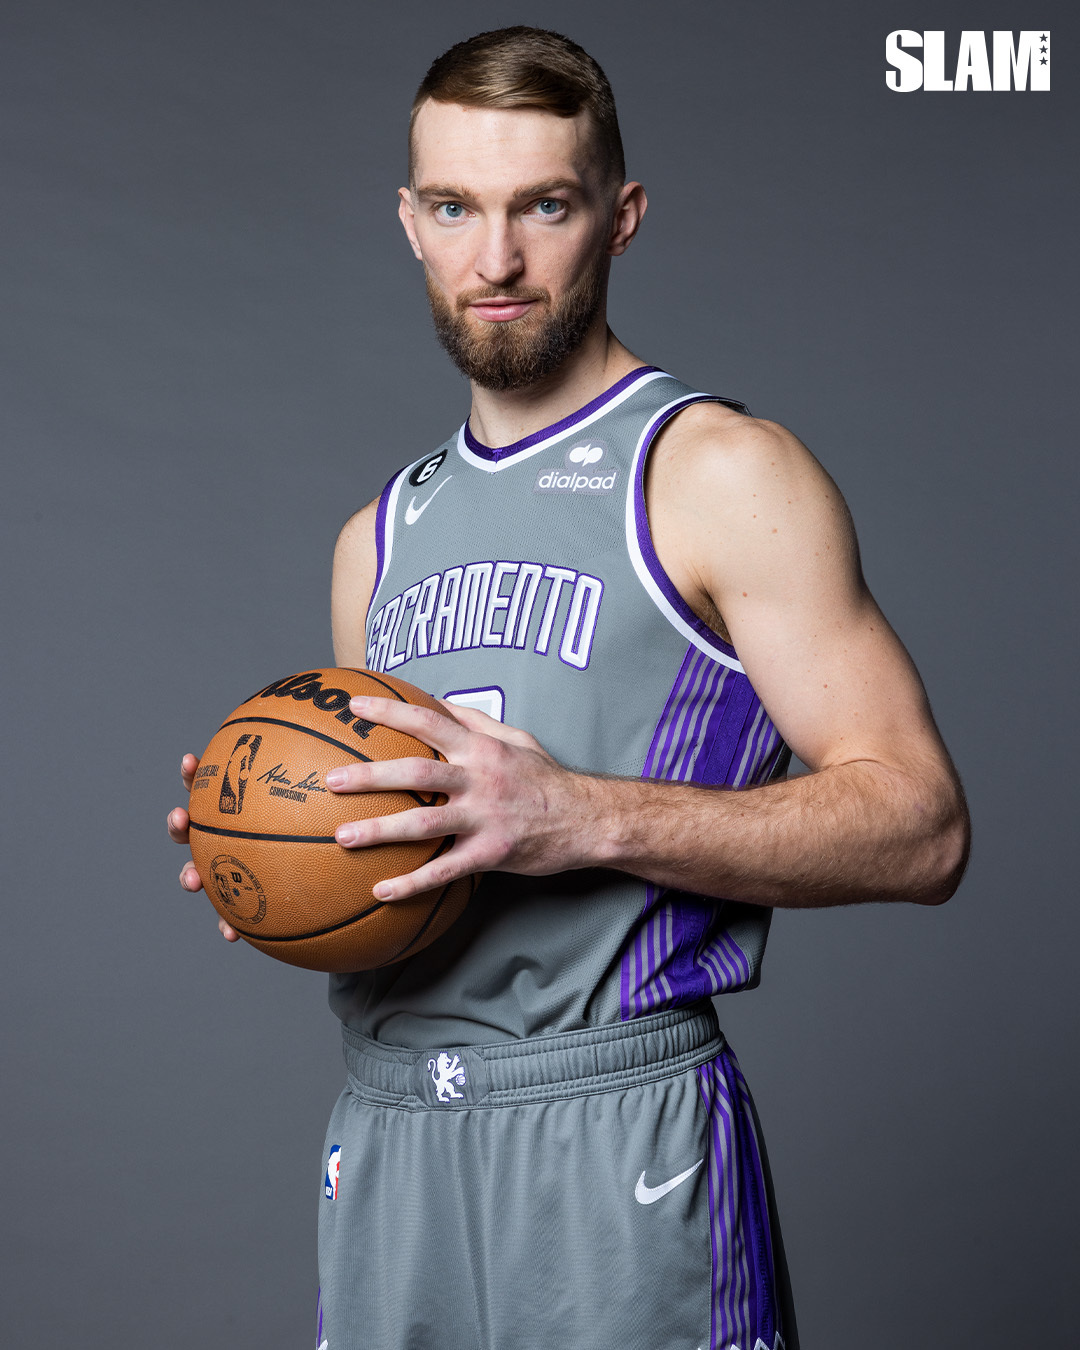 Domantas Sabonis' Napa House: The Story Behind Sacramento Kings' Sizzling  Chemistry in NBA Playoffs, by INDIA Bloging